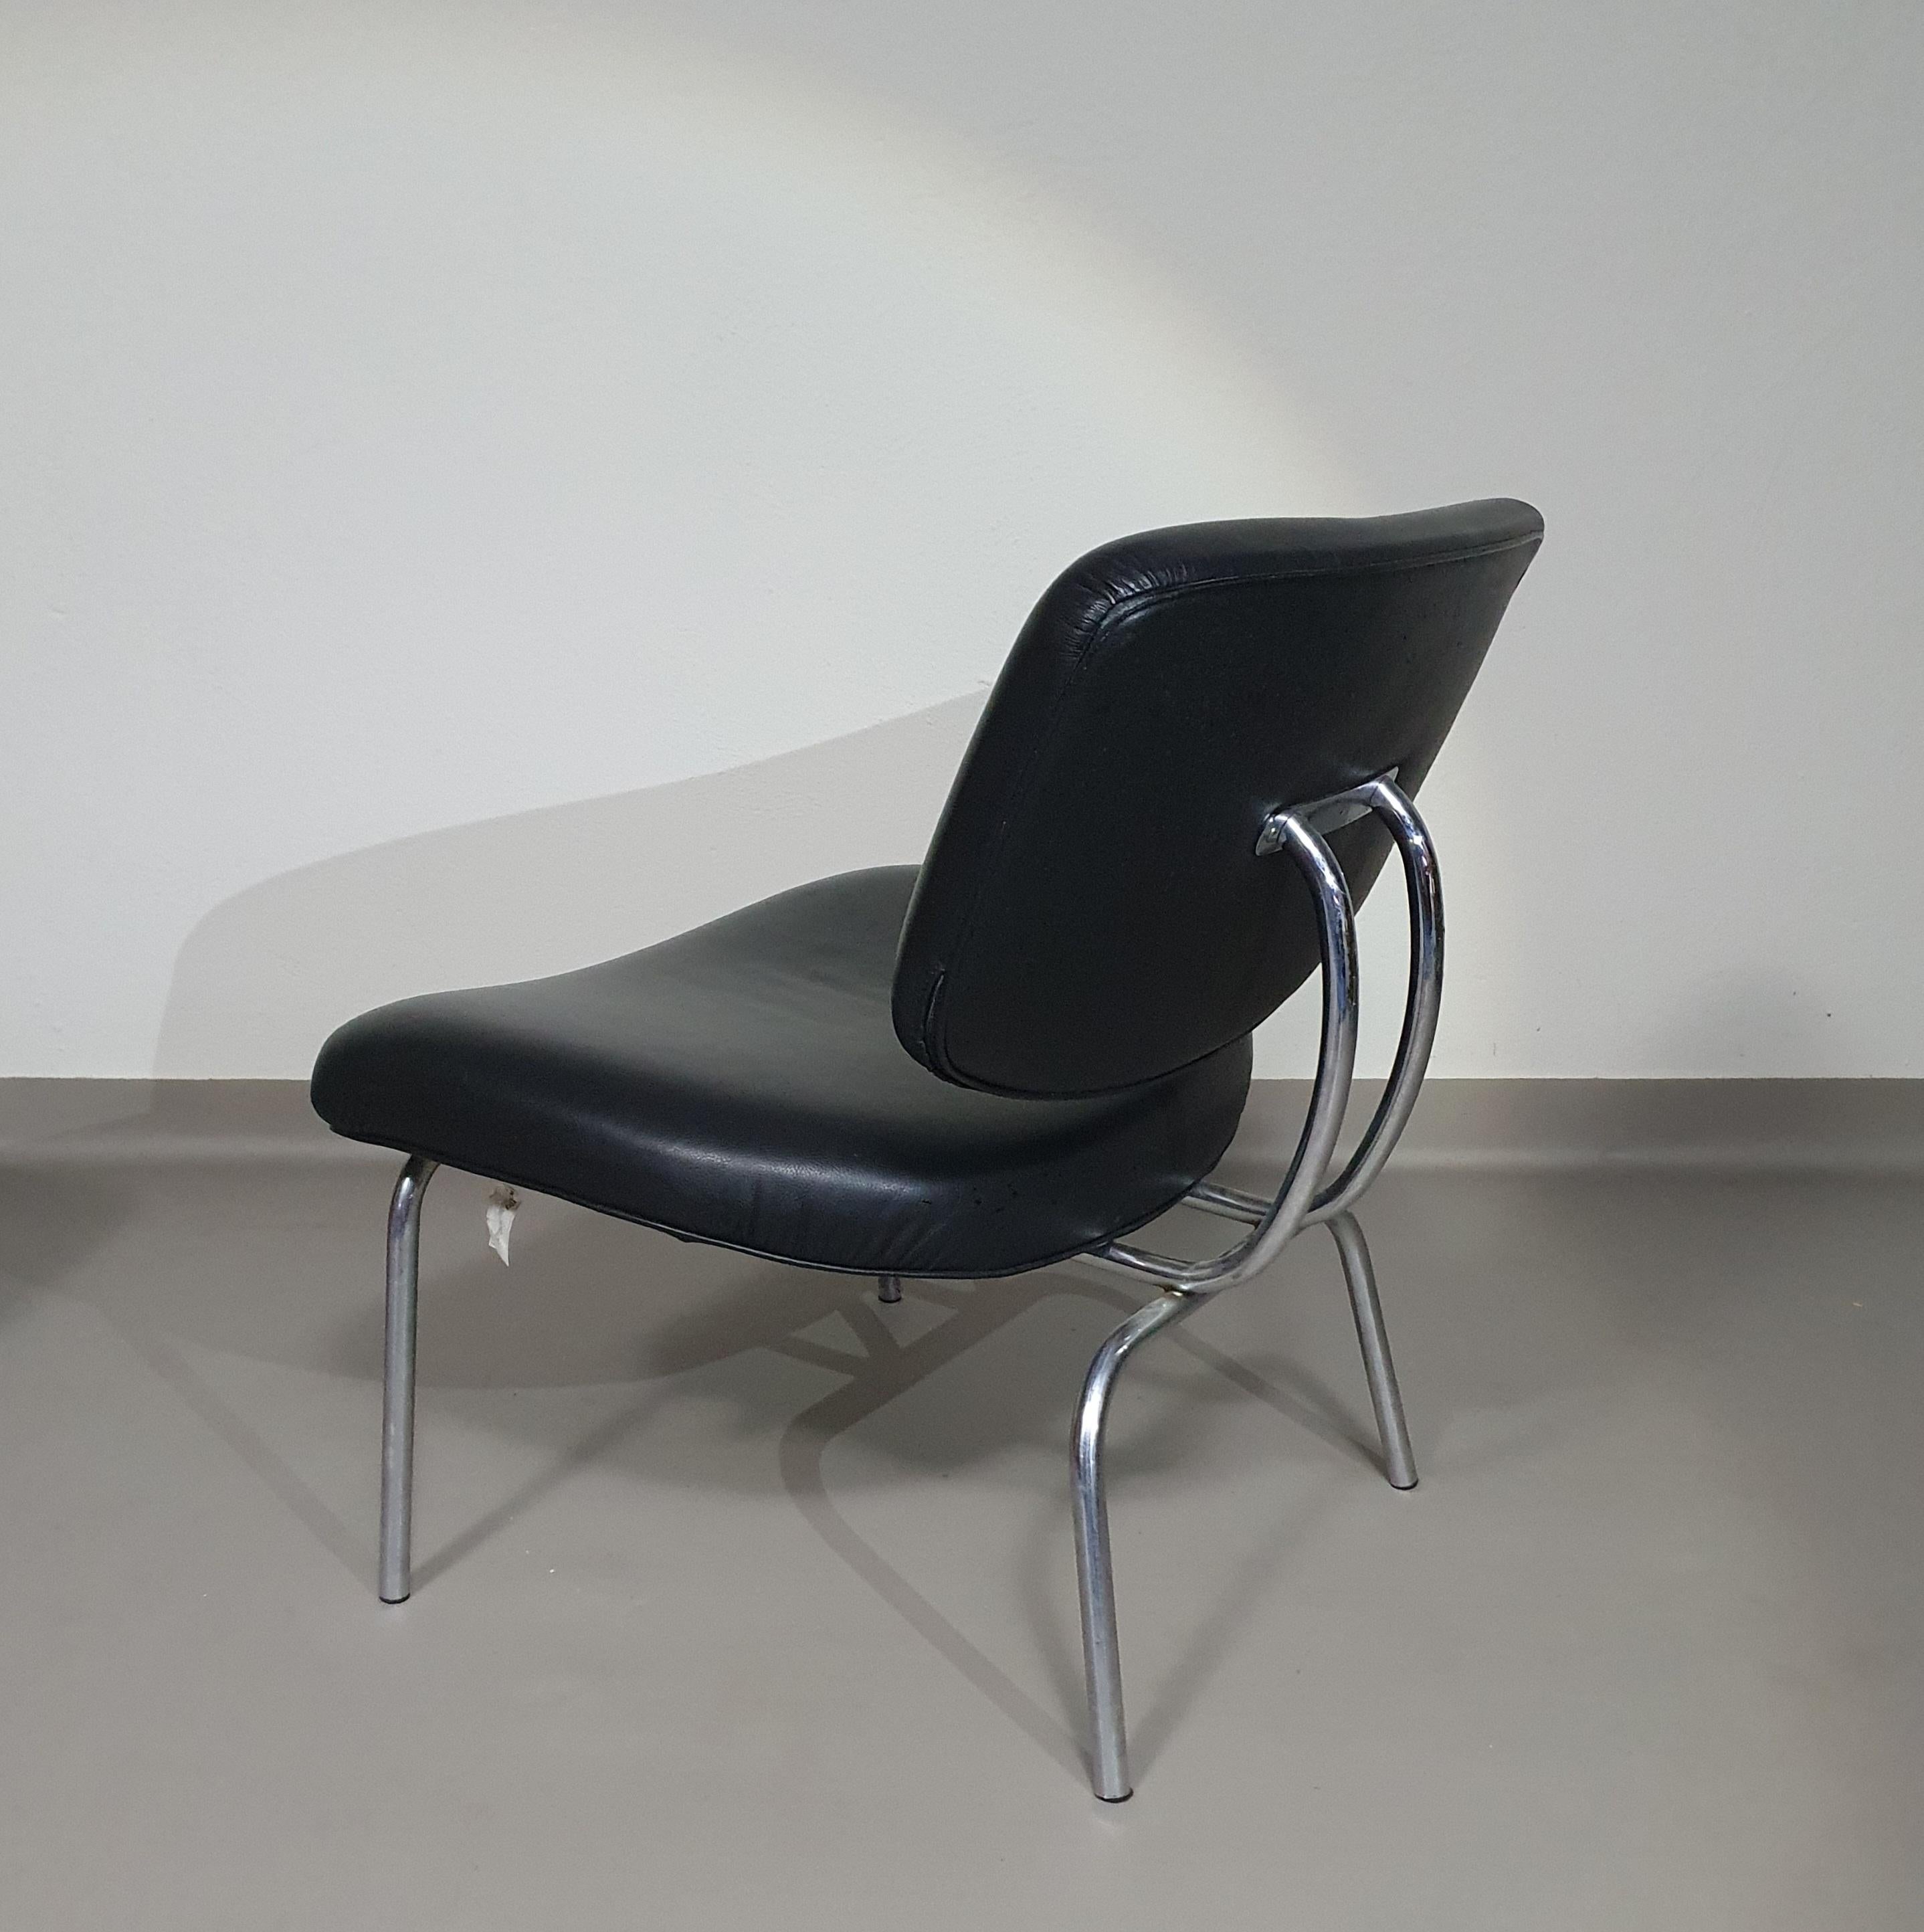 Zanotta Clea lounge chair / pouf in black leather / 1997 by Kristiina Lassus For Sale 4